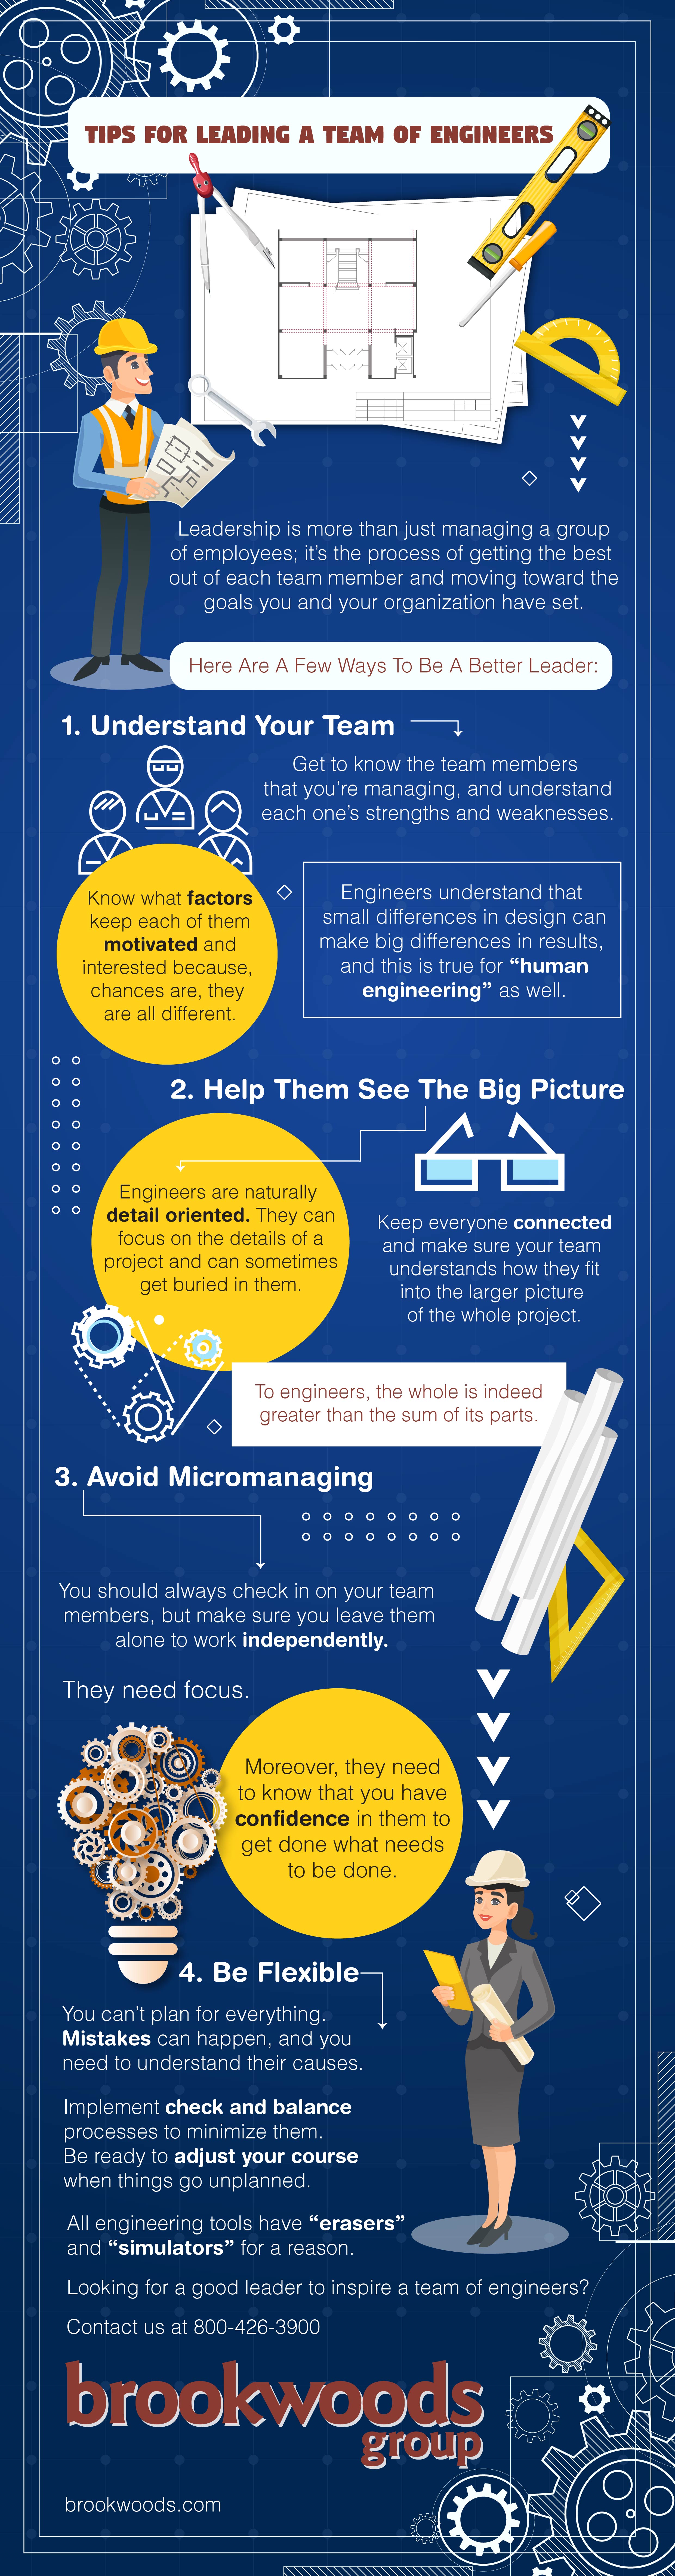 tips for a leading a team of engineers